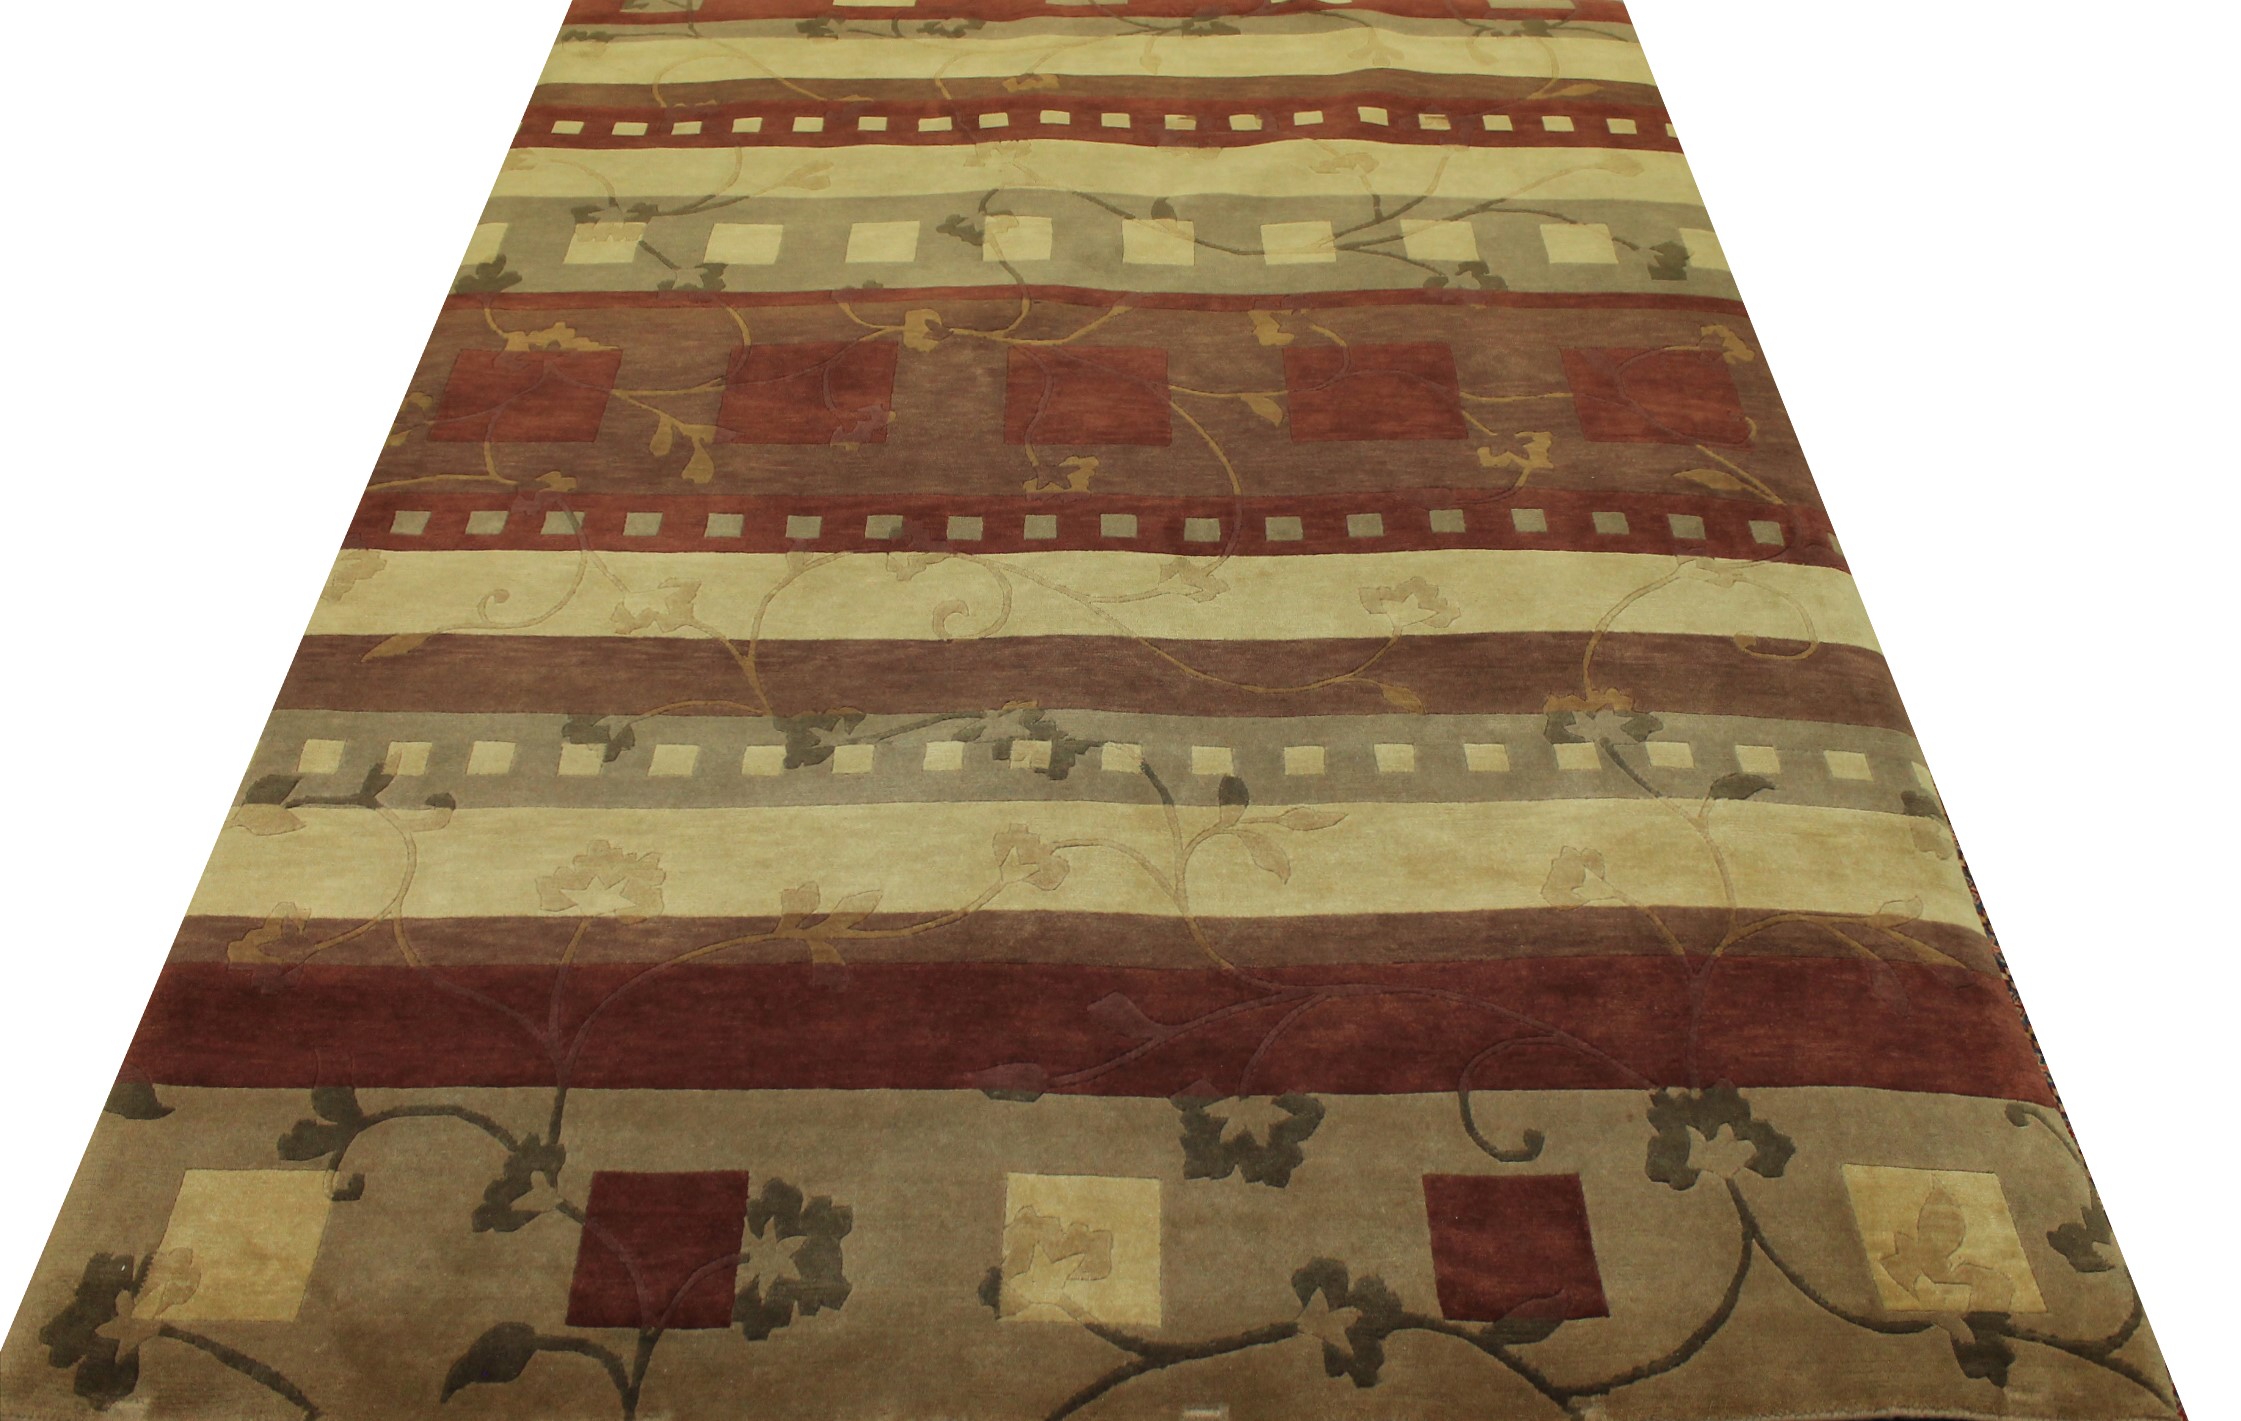 Clearance & Discount Rugs Tibet Style Hand Knotted Rug 8451 Lt. Brown - Chocolate & Multi Hand Knotted Rug